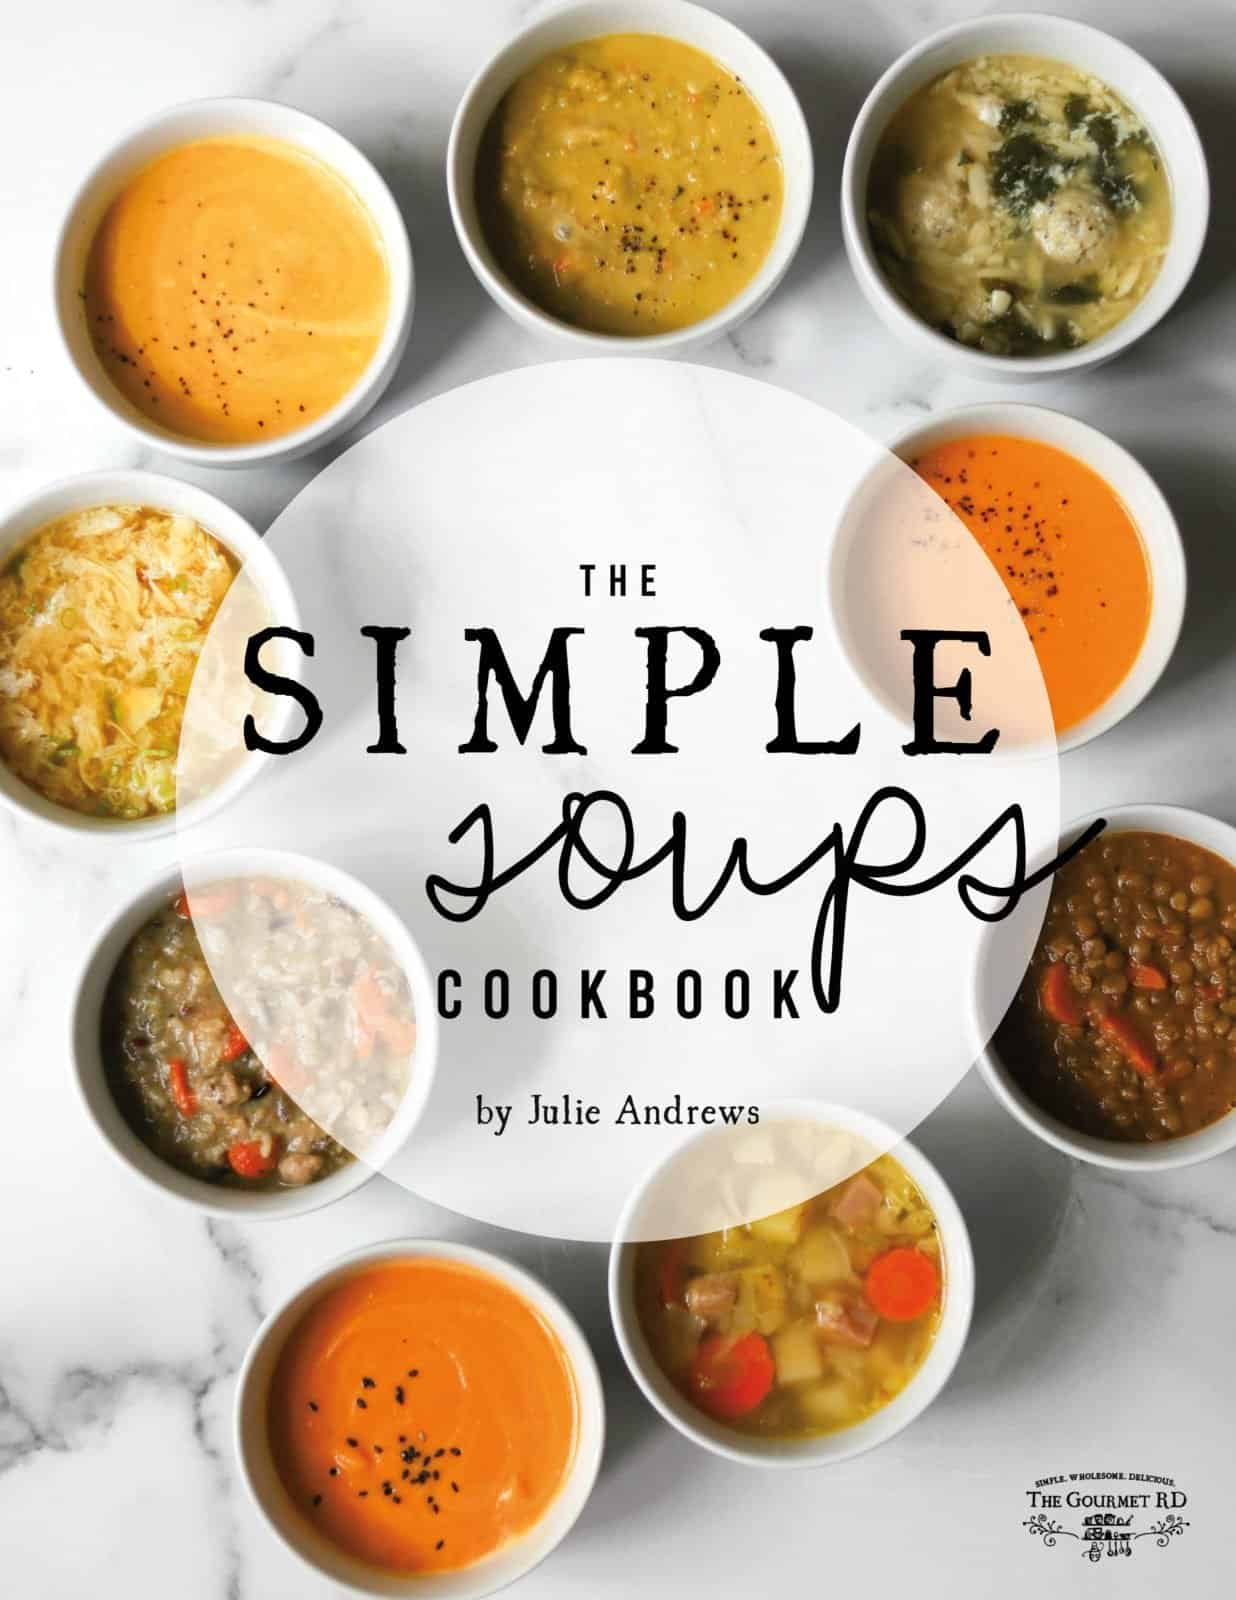 Simple Soups Cookbook Cover.